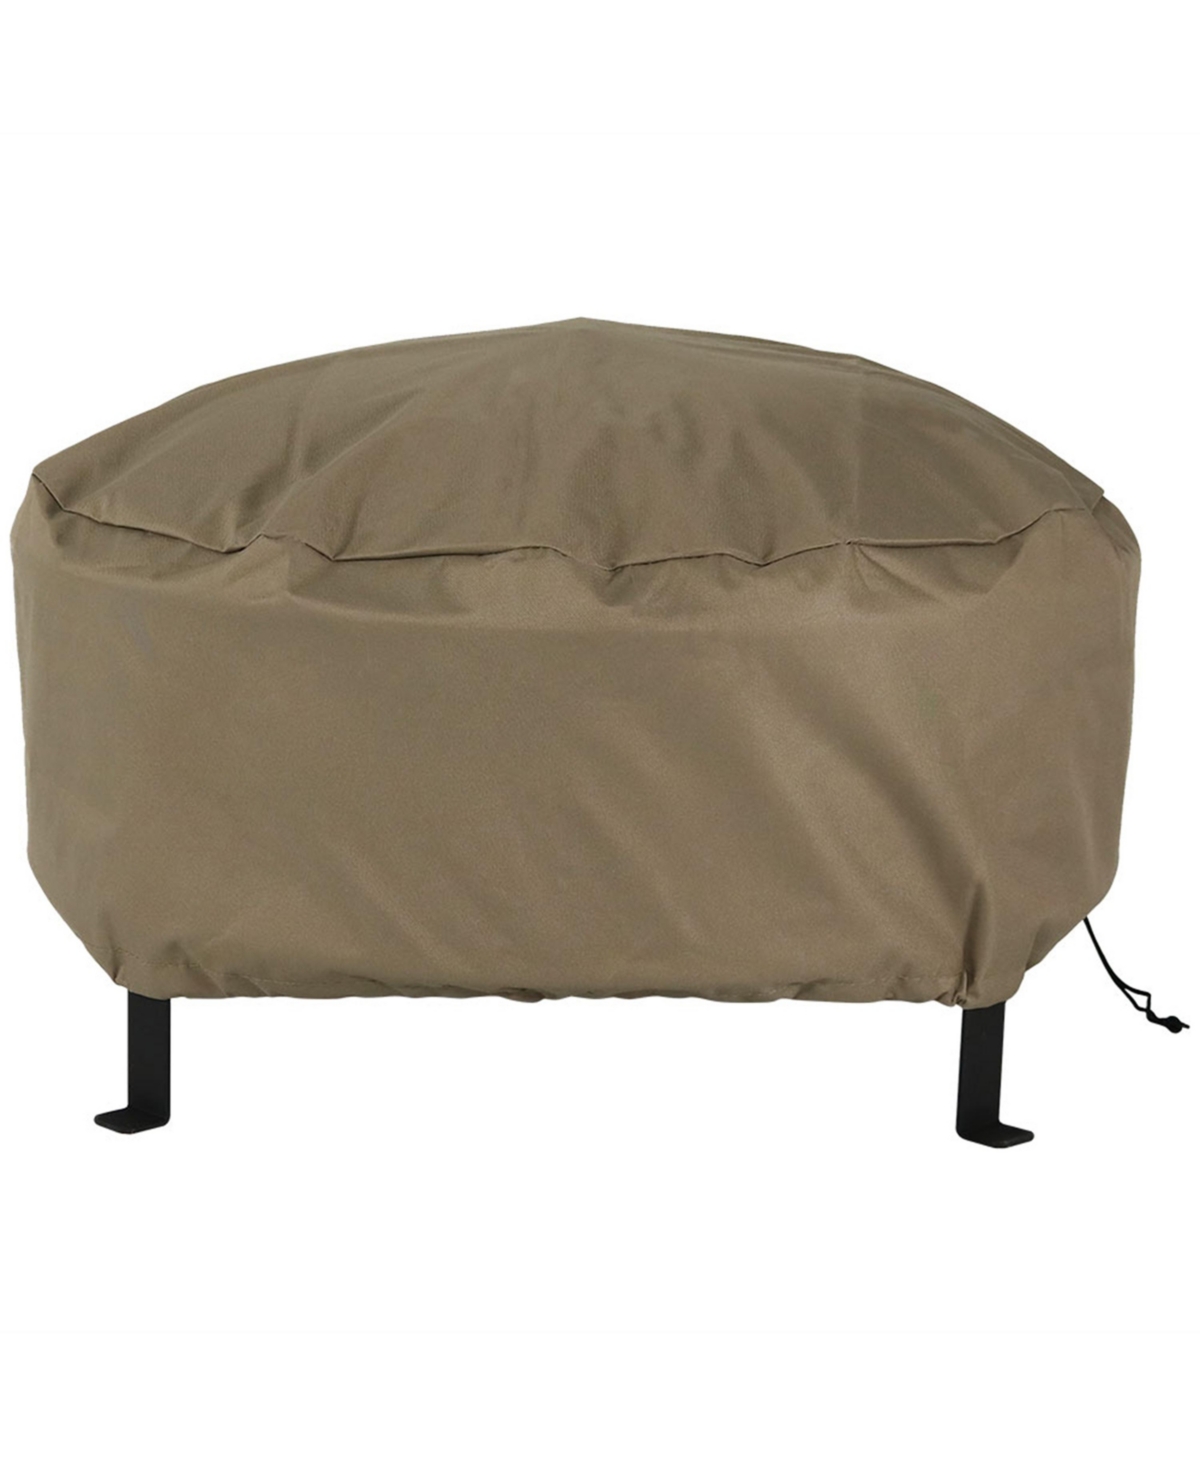 48 in Heavy-Duty Polyester Round Outdoor Fire Pit Cover - Khaki - Light brown